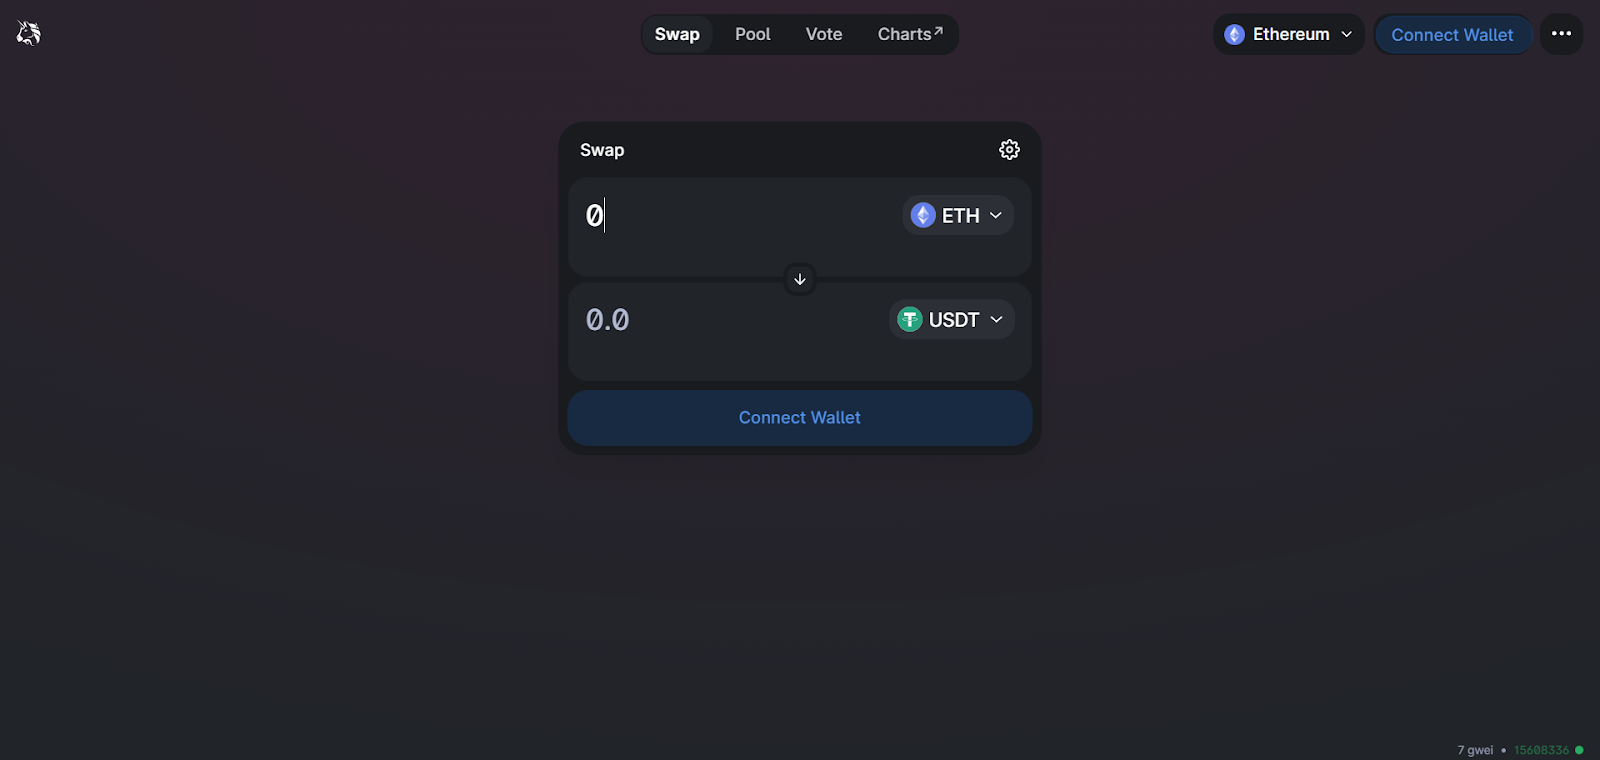 A screenshot showing how to select the tokens you want to swap and receive on Uniswap.